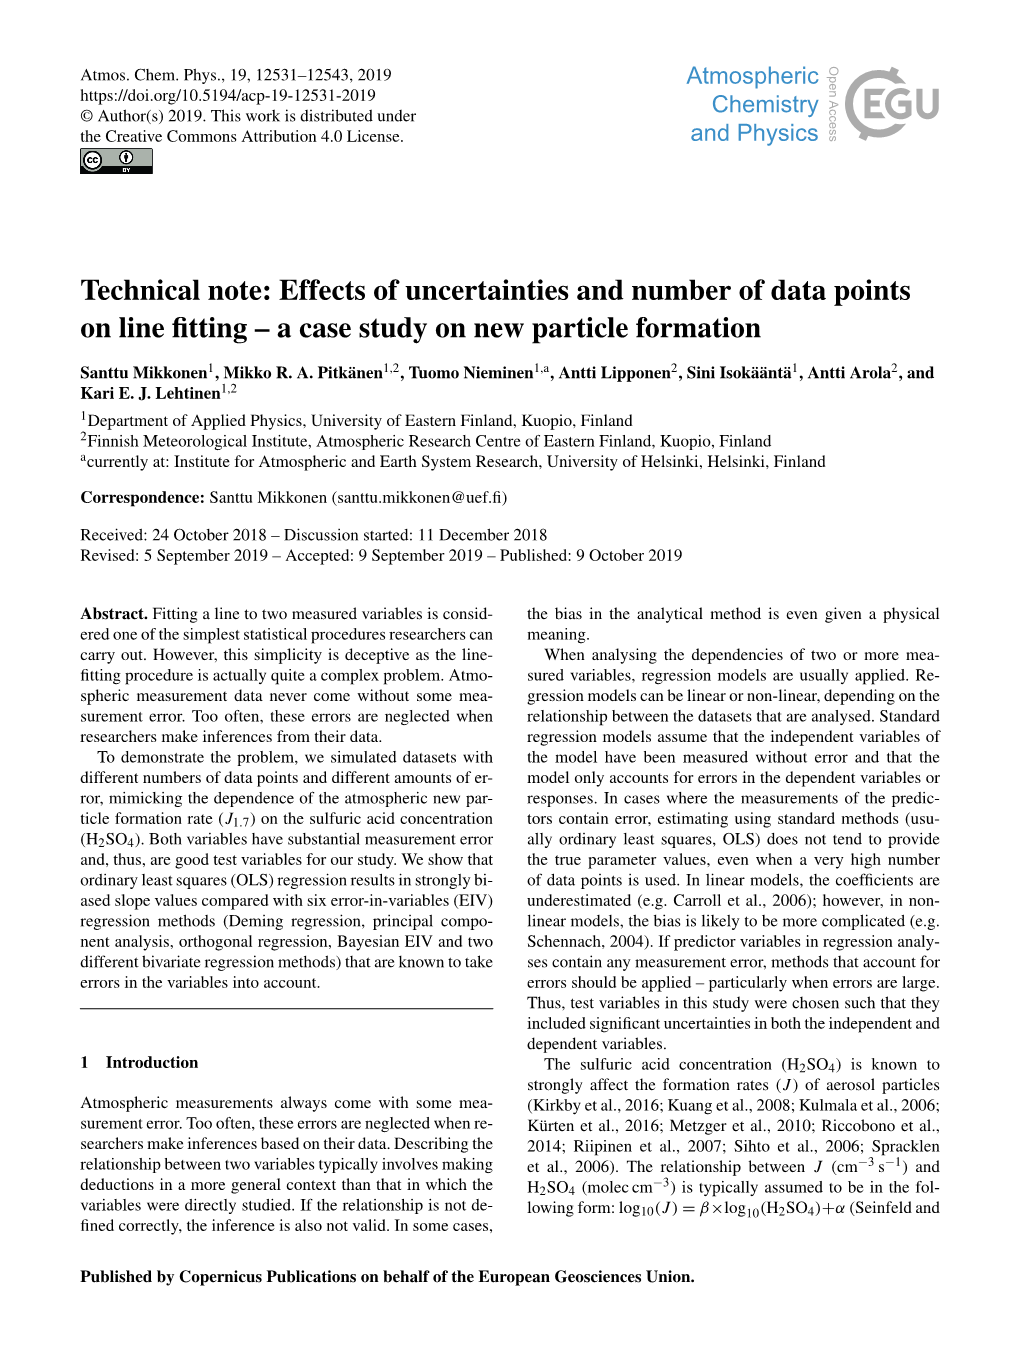 Effects of Uncertainties and Number of Data Points on Line Fitting–A Case